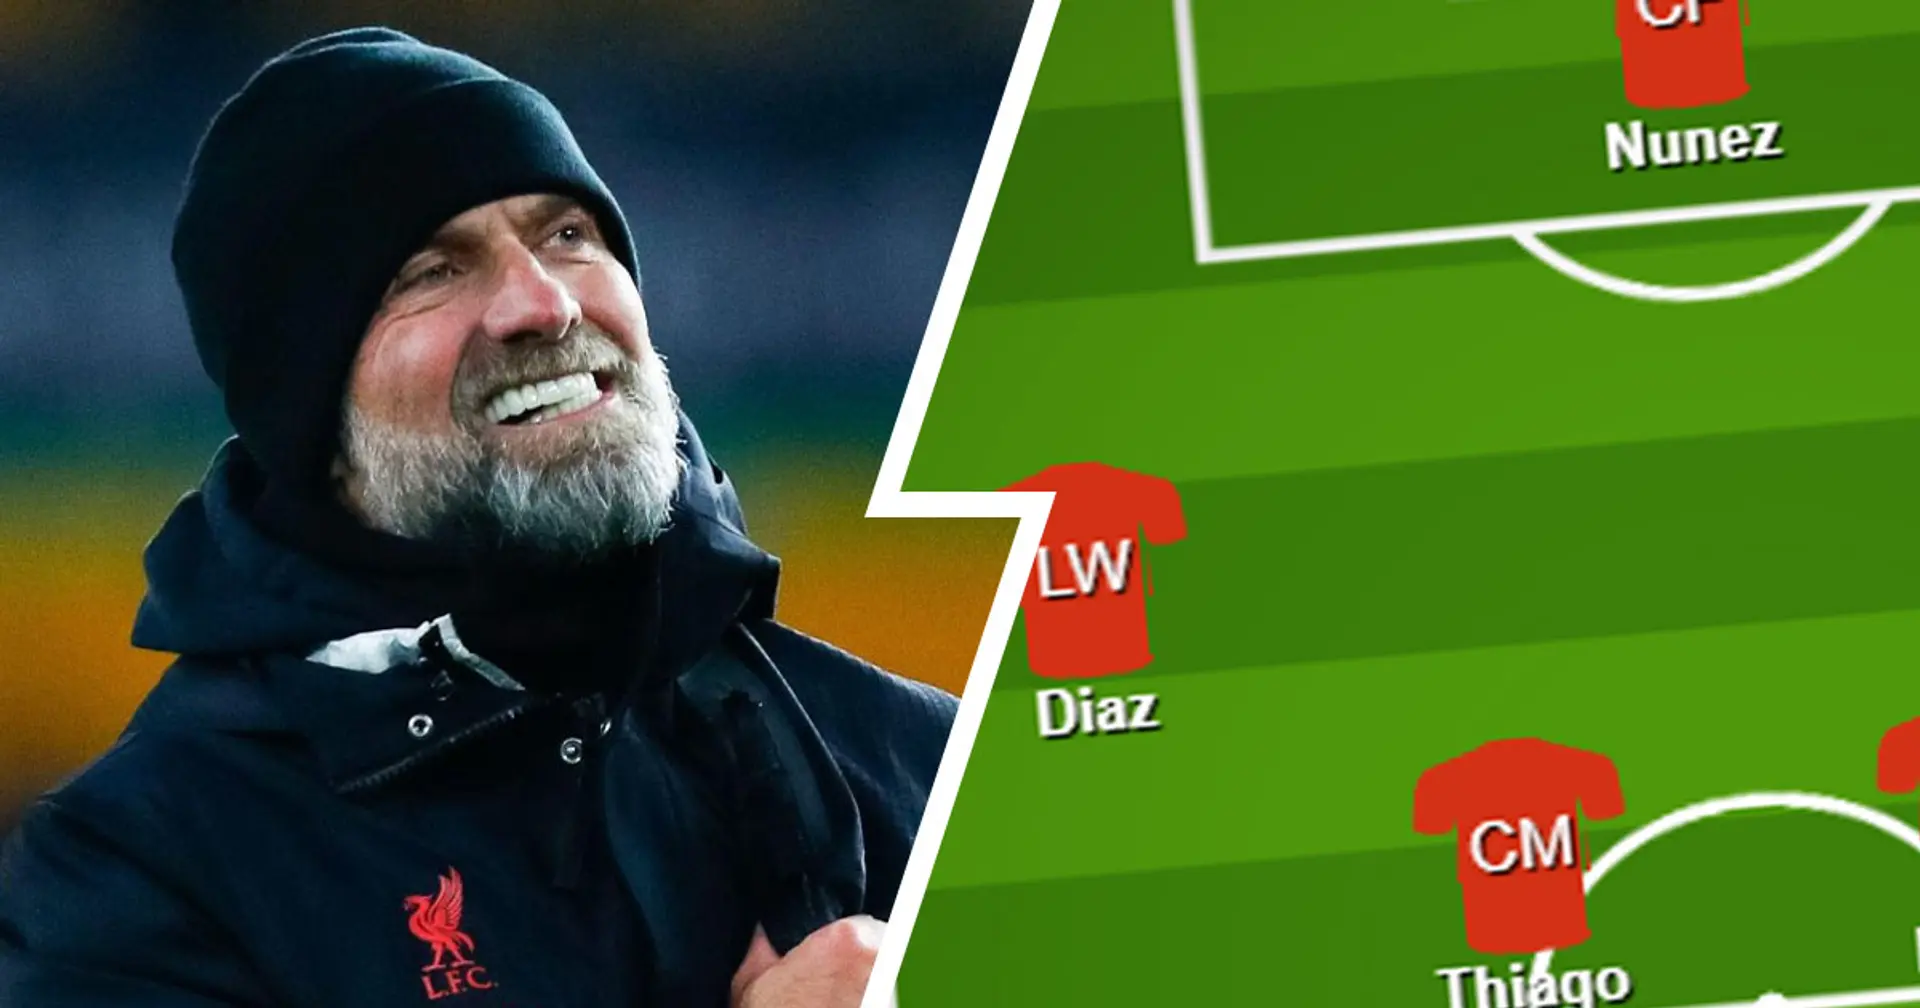 What will Liverpool's strongest XI be with fully fit squad - shown in lineup